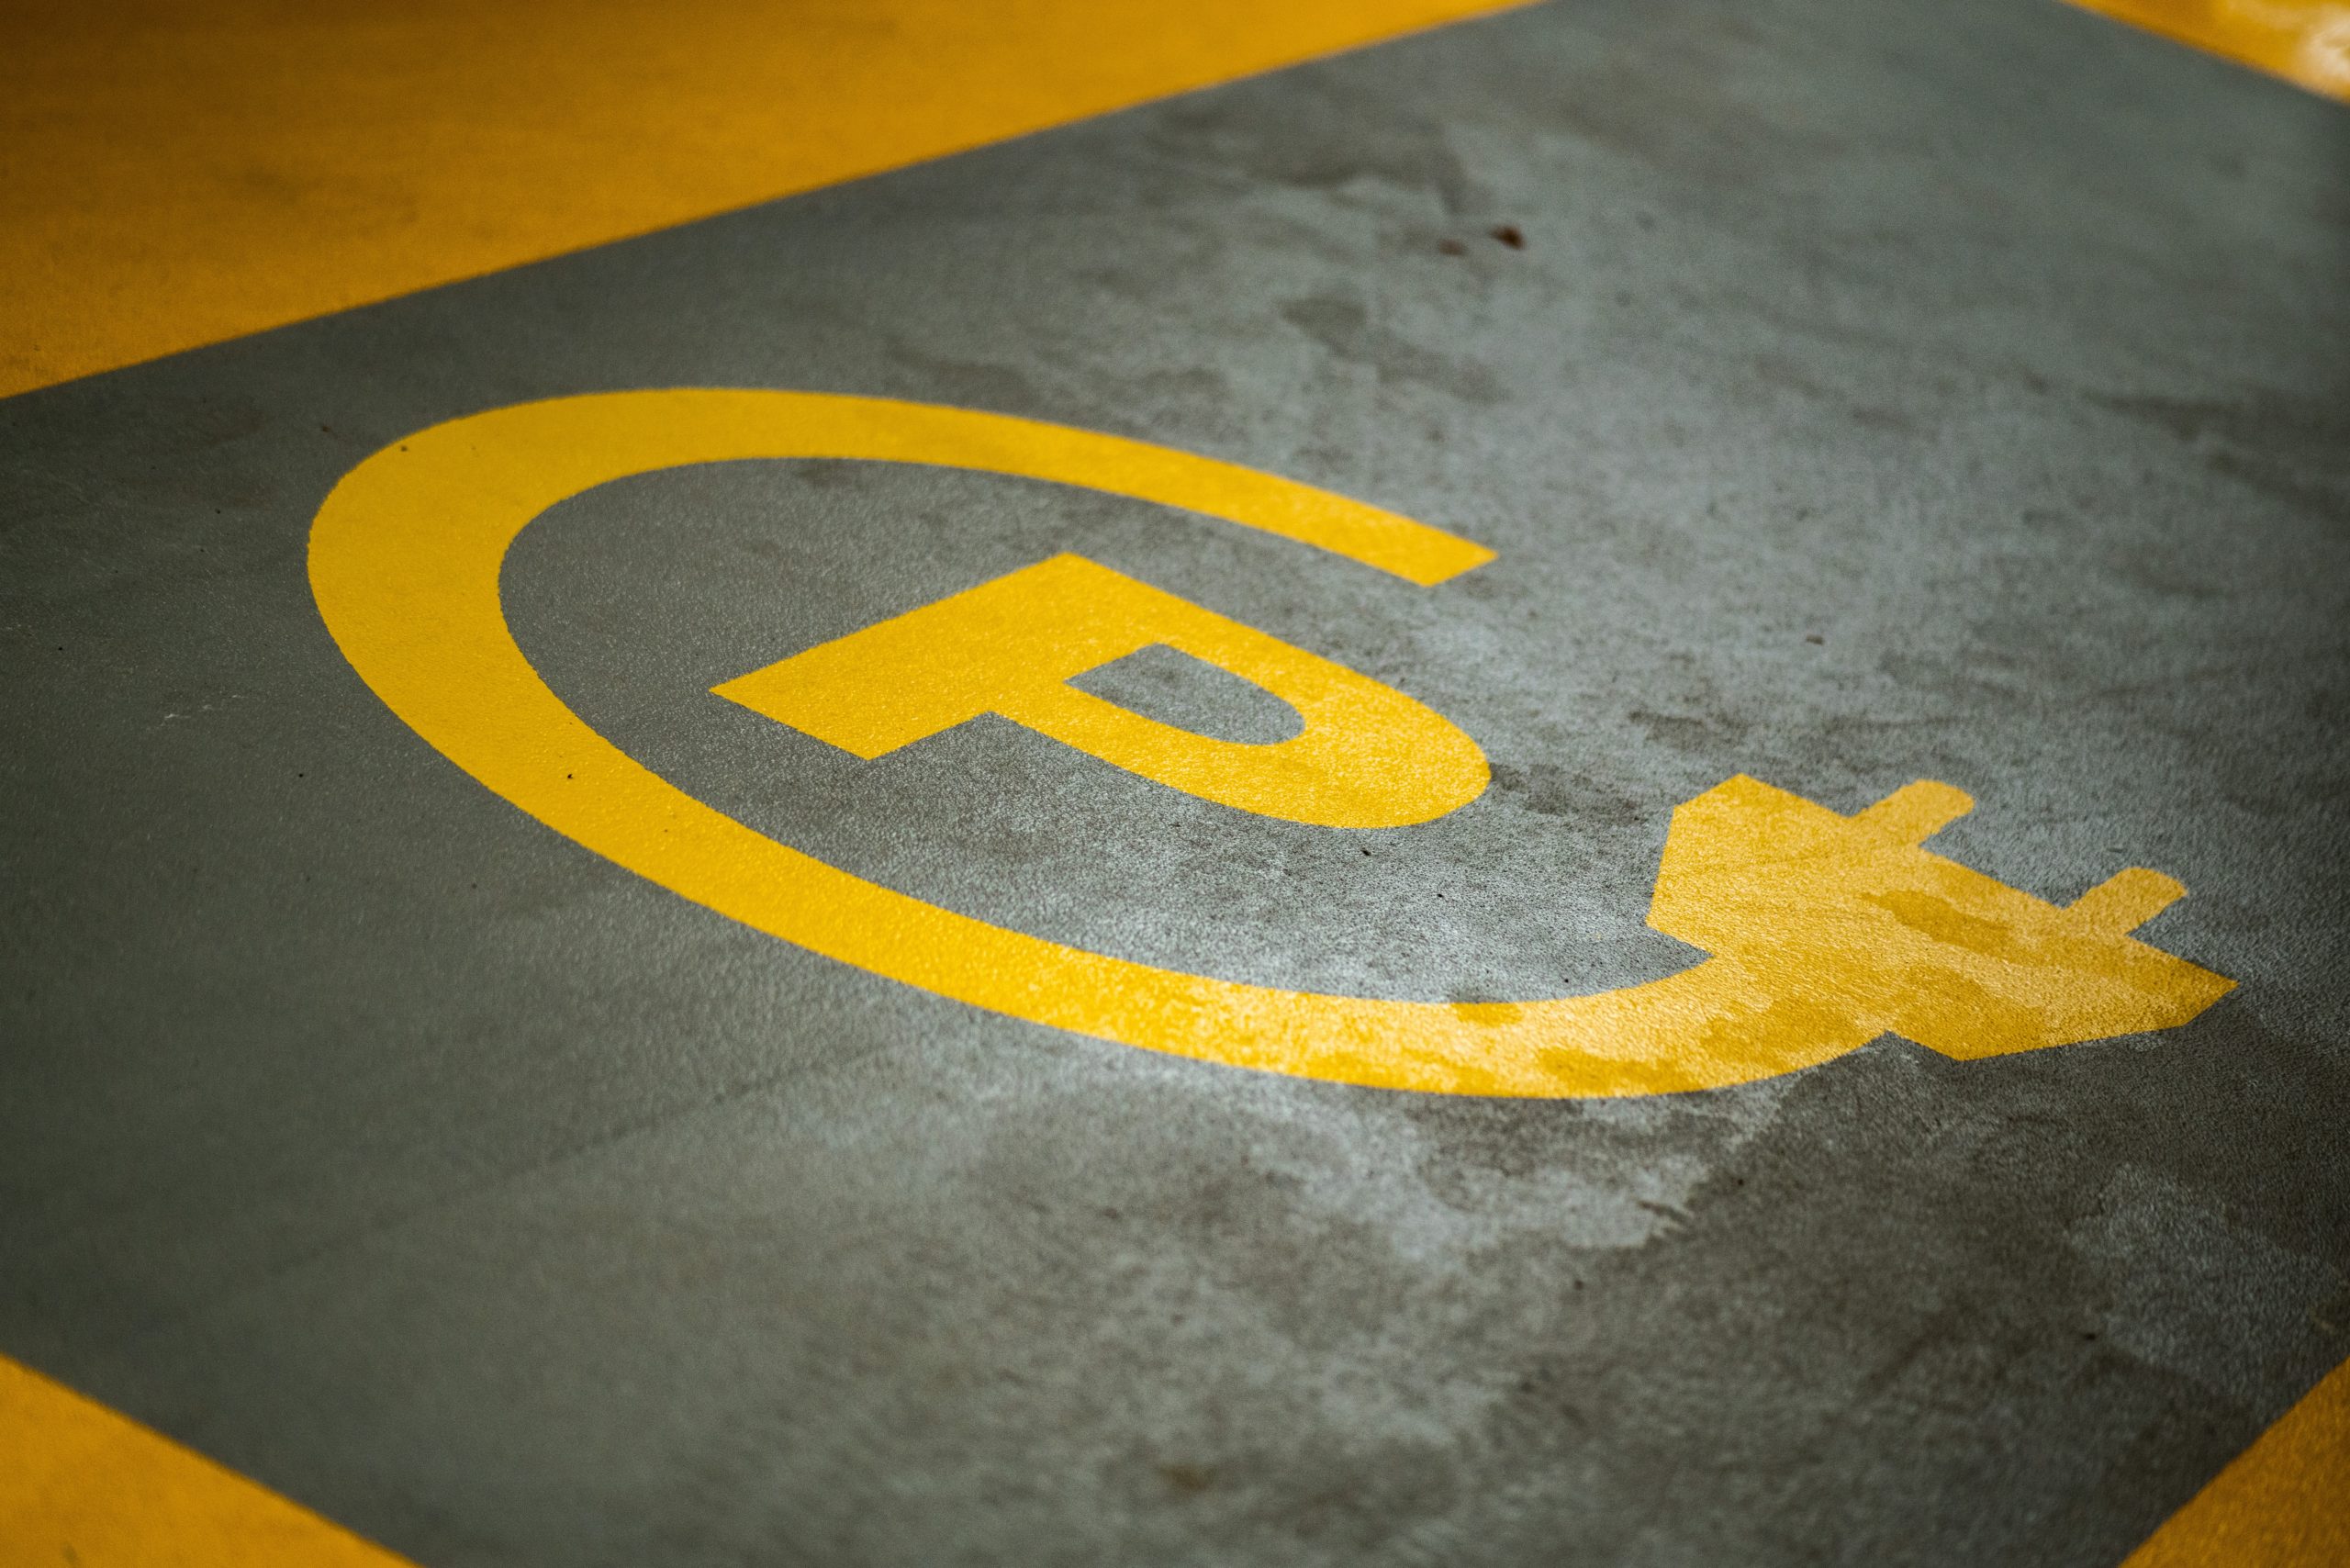 image of a parking spot for electric vehicle charging with a P surrounded by an electrical cord symbol